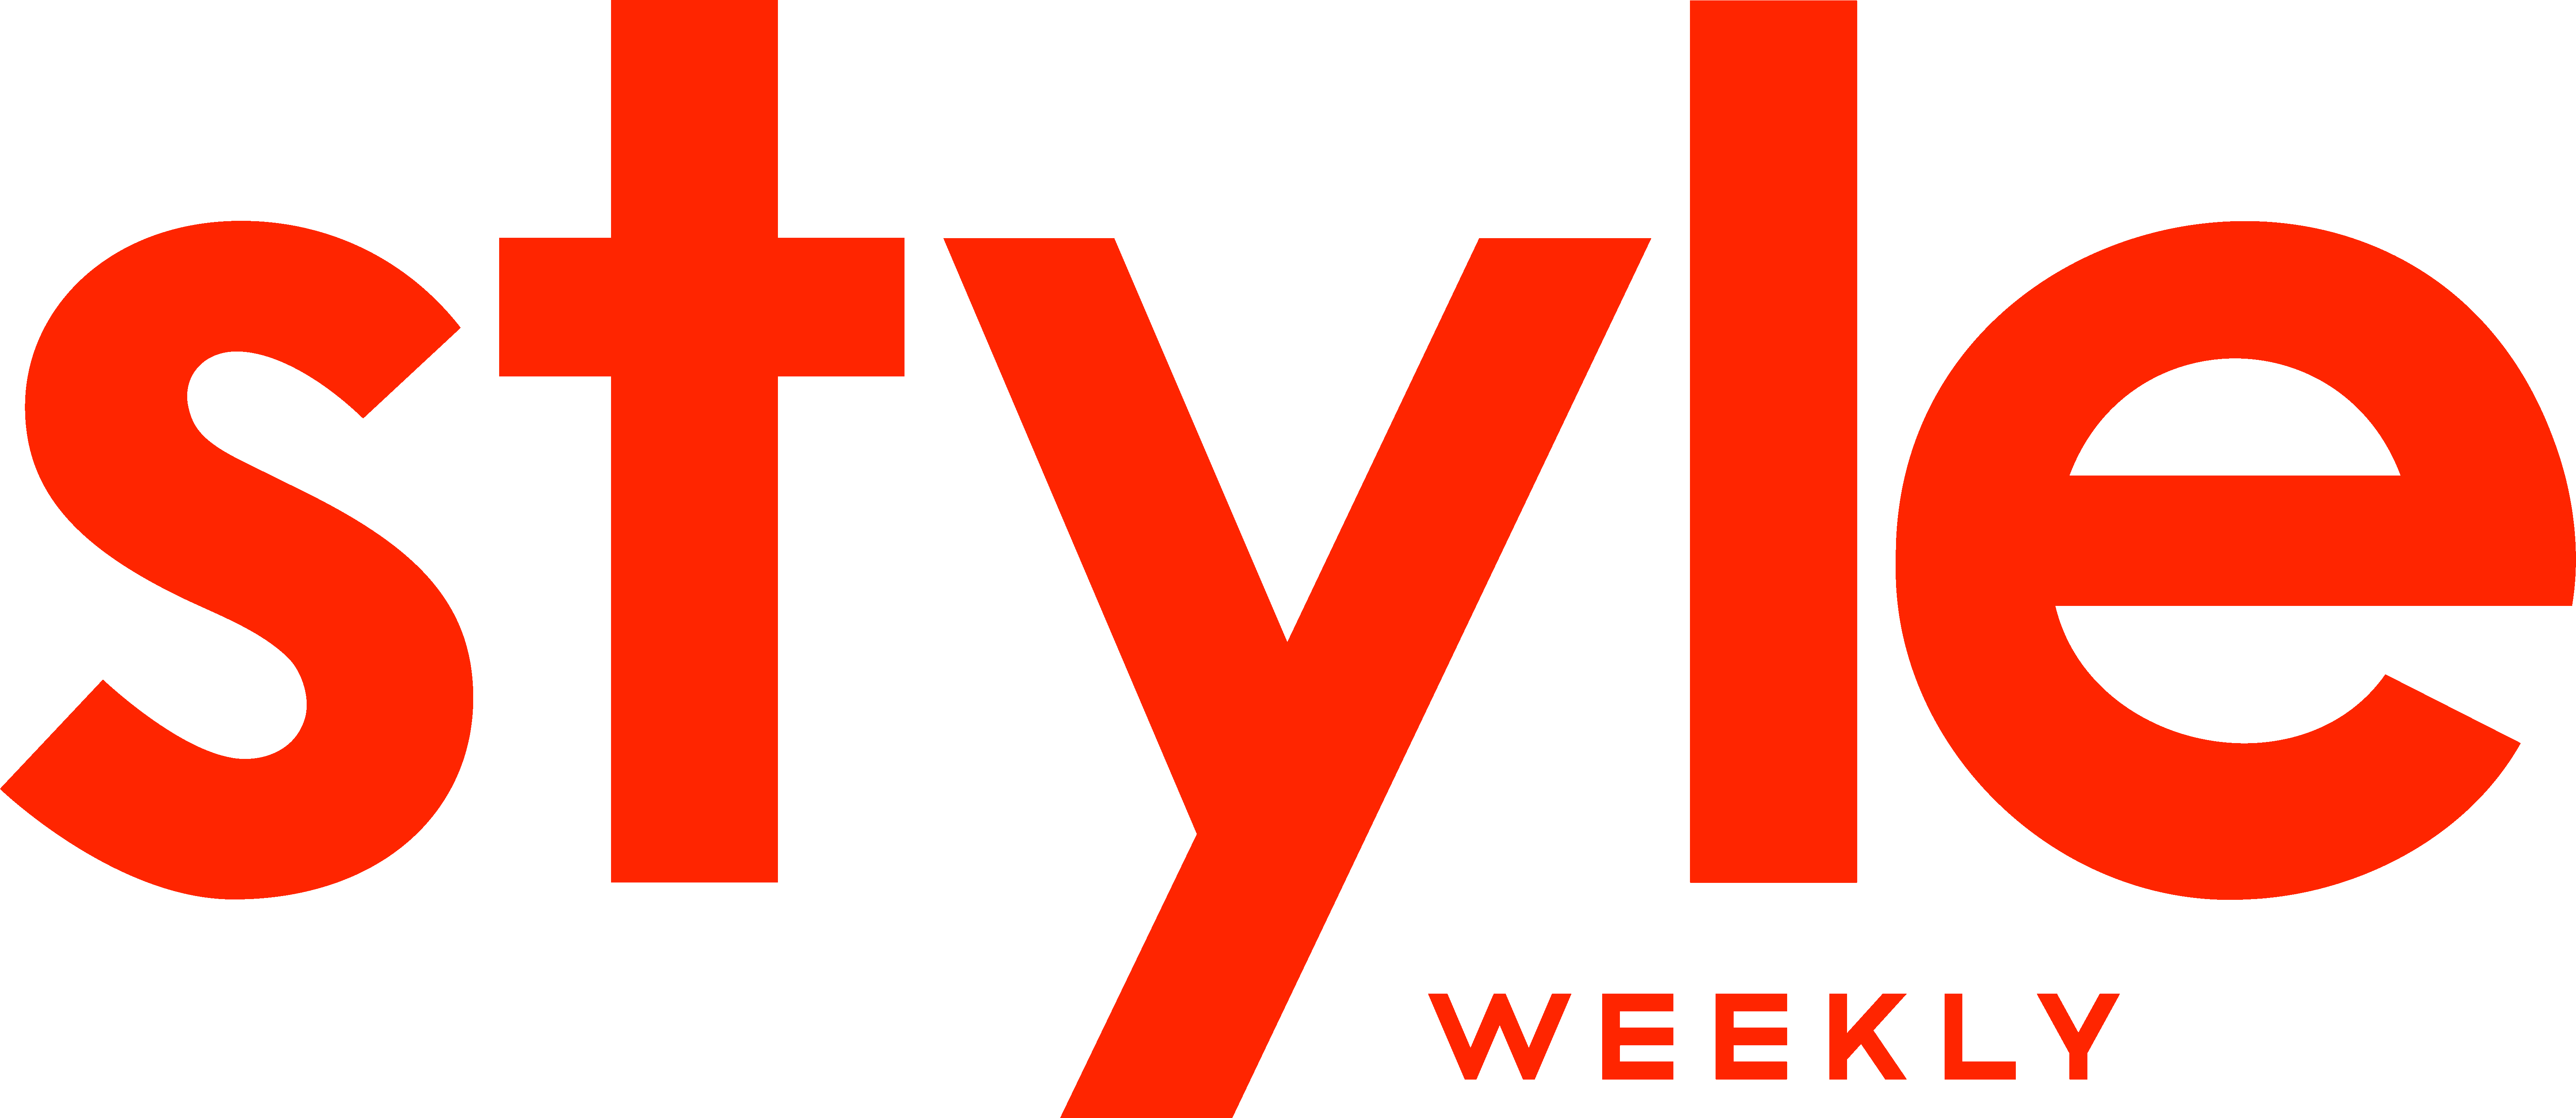 style weekly logo